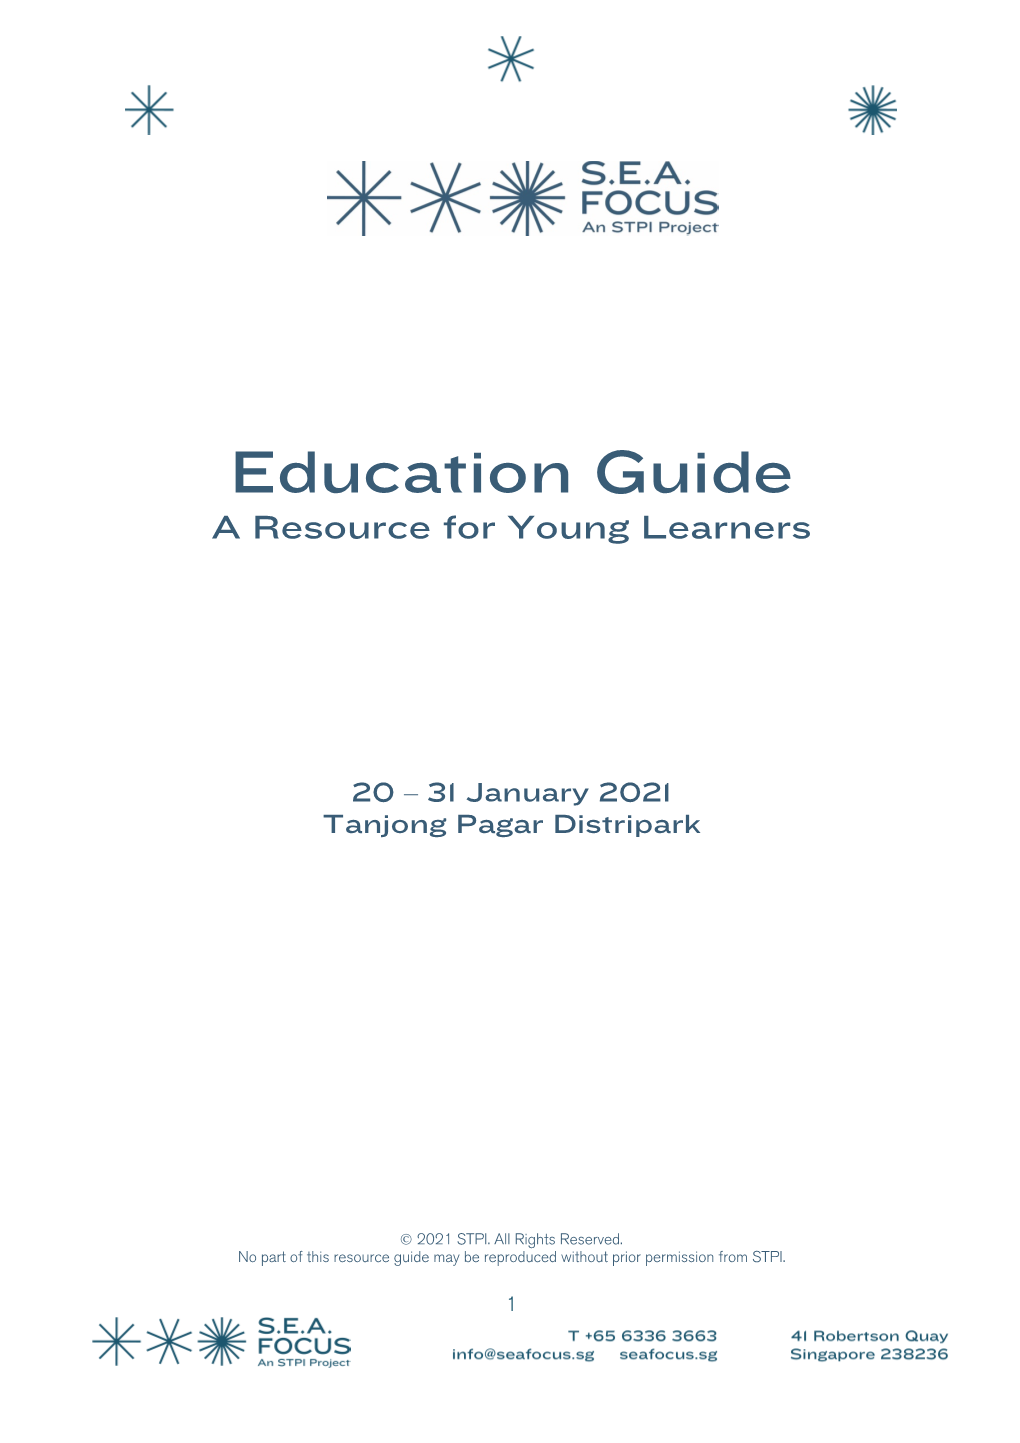 Education Guide a Resource for Young Learners